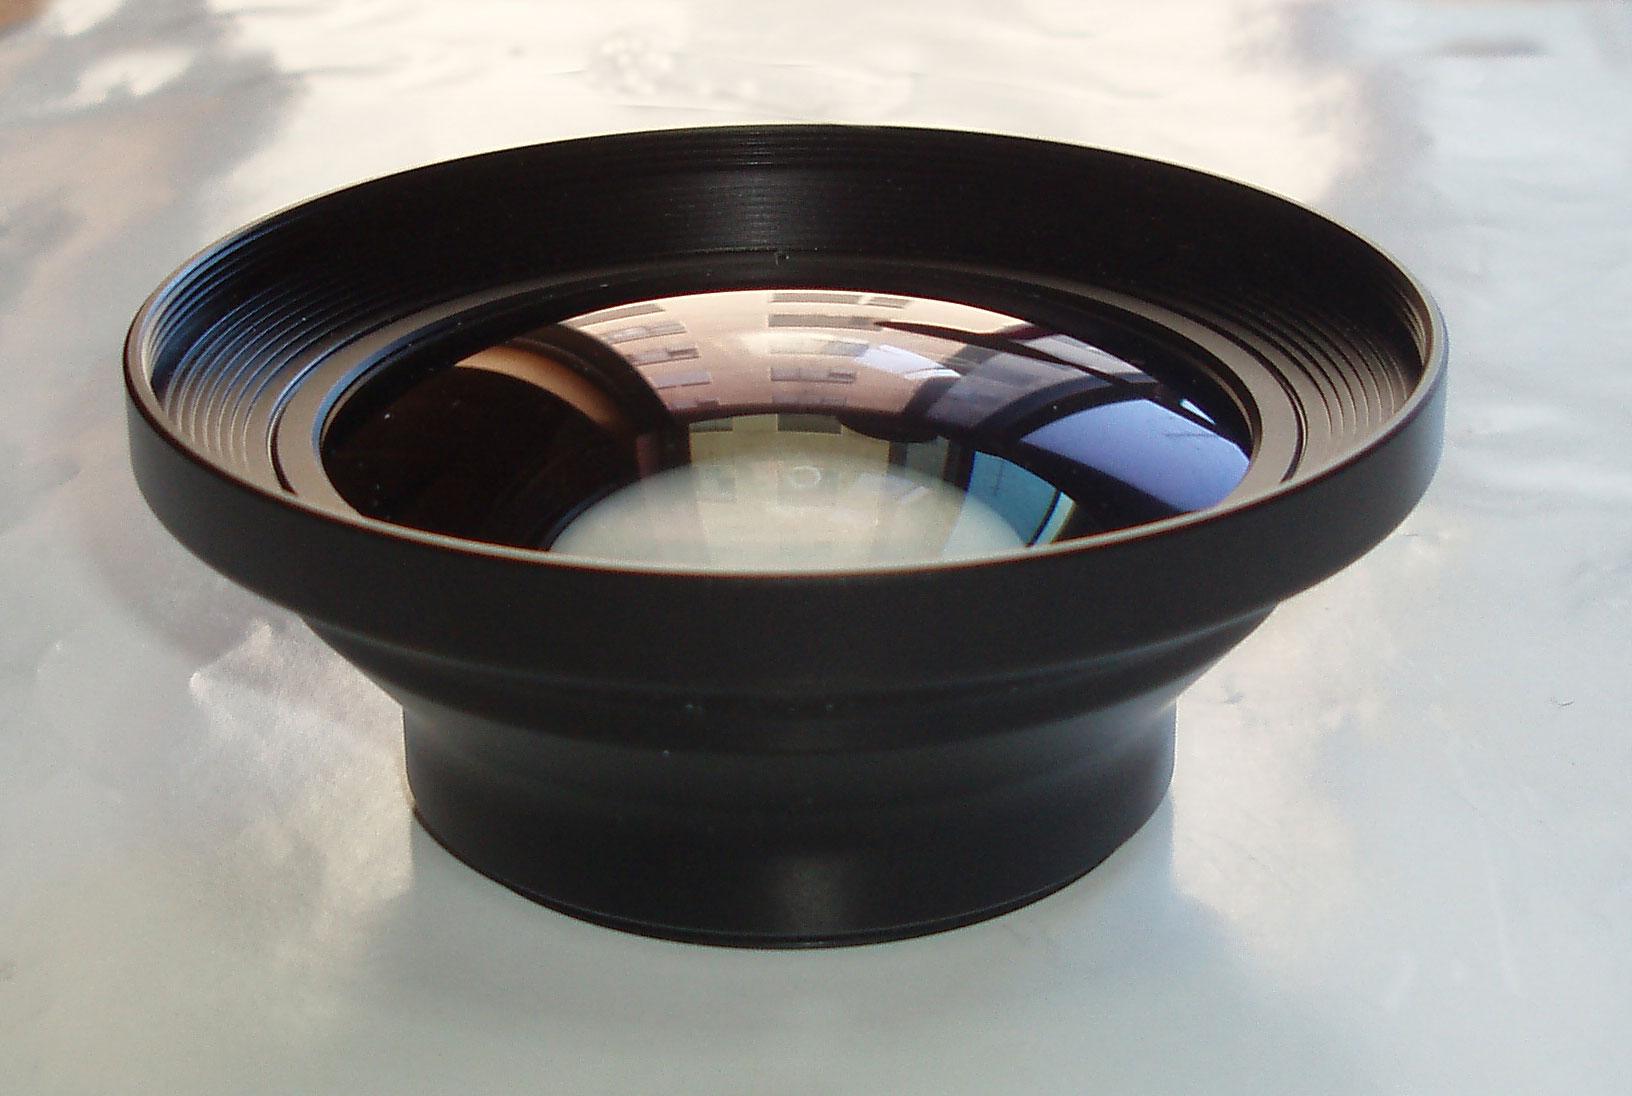 Sell 72mm 0.7x Wide Angle converter Lens